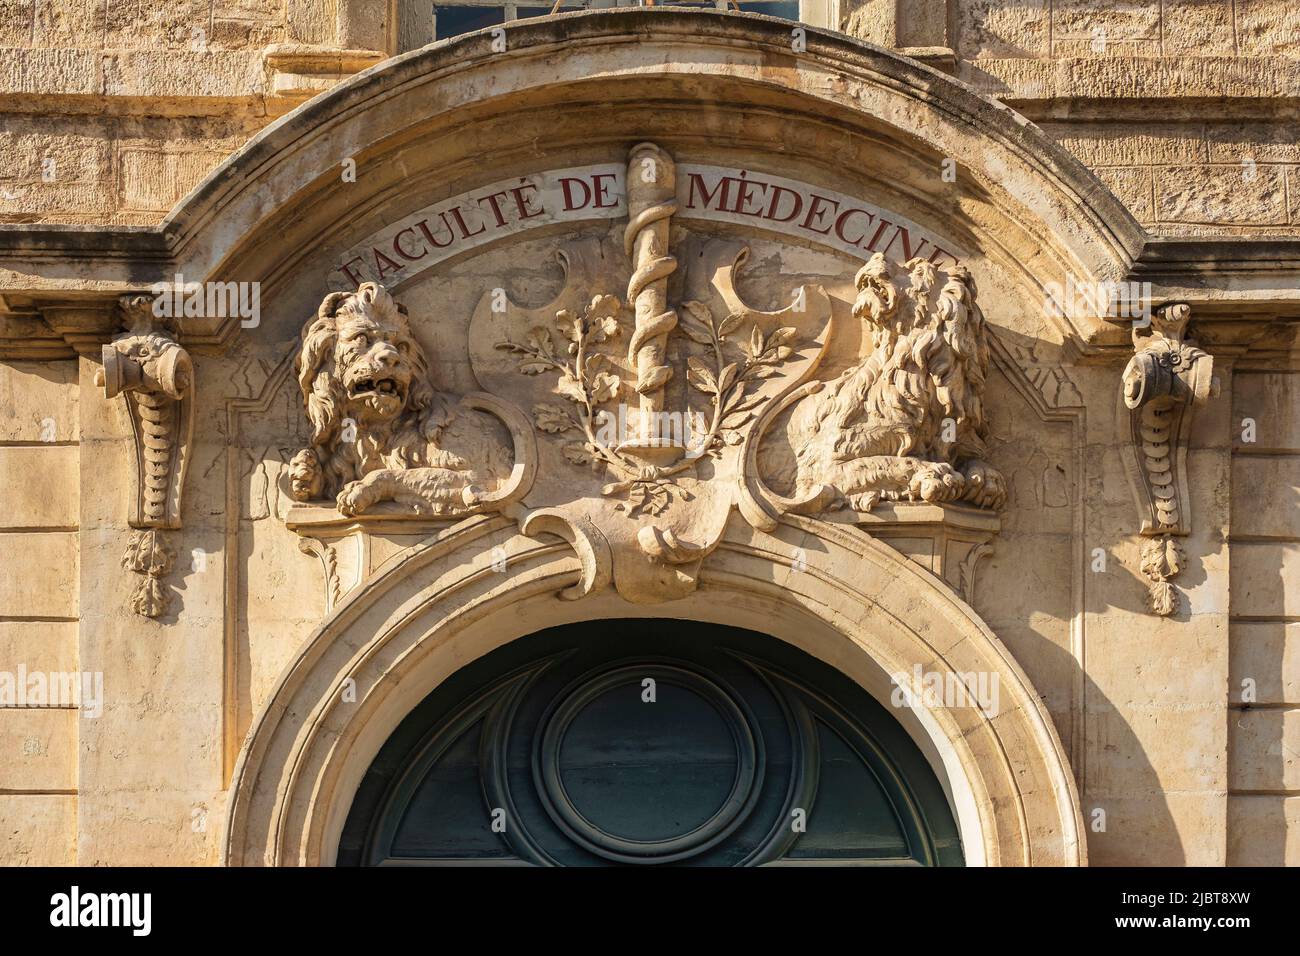 France, Herault, Montpellier, Faculty of Medicine of Montpellier created in 1220 Stock Photo